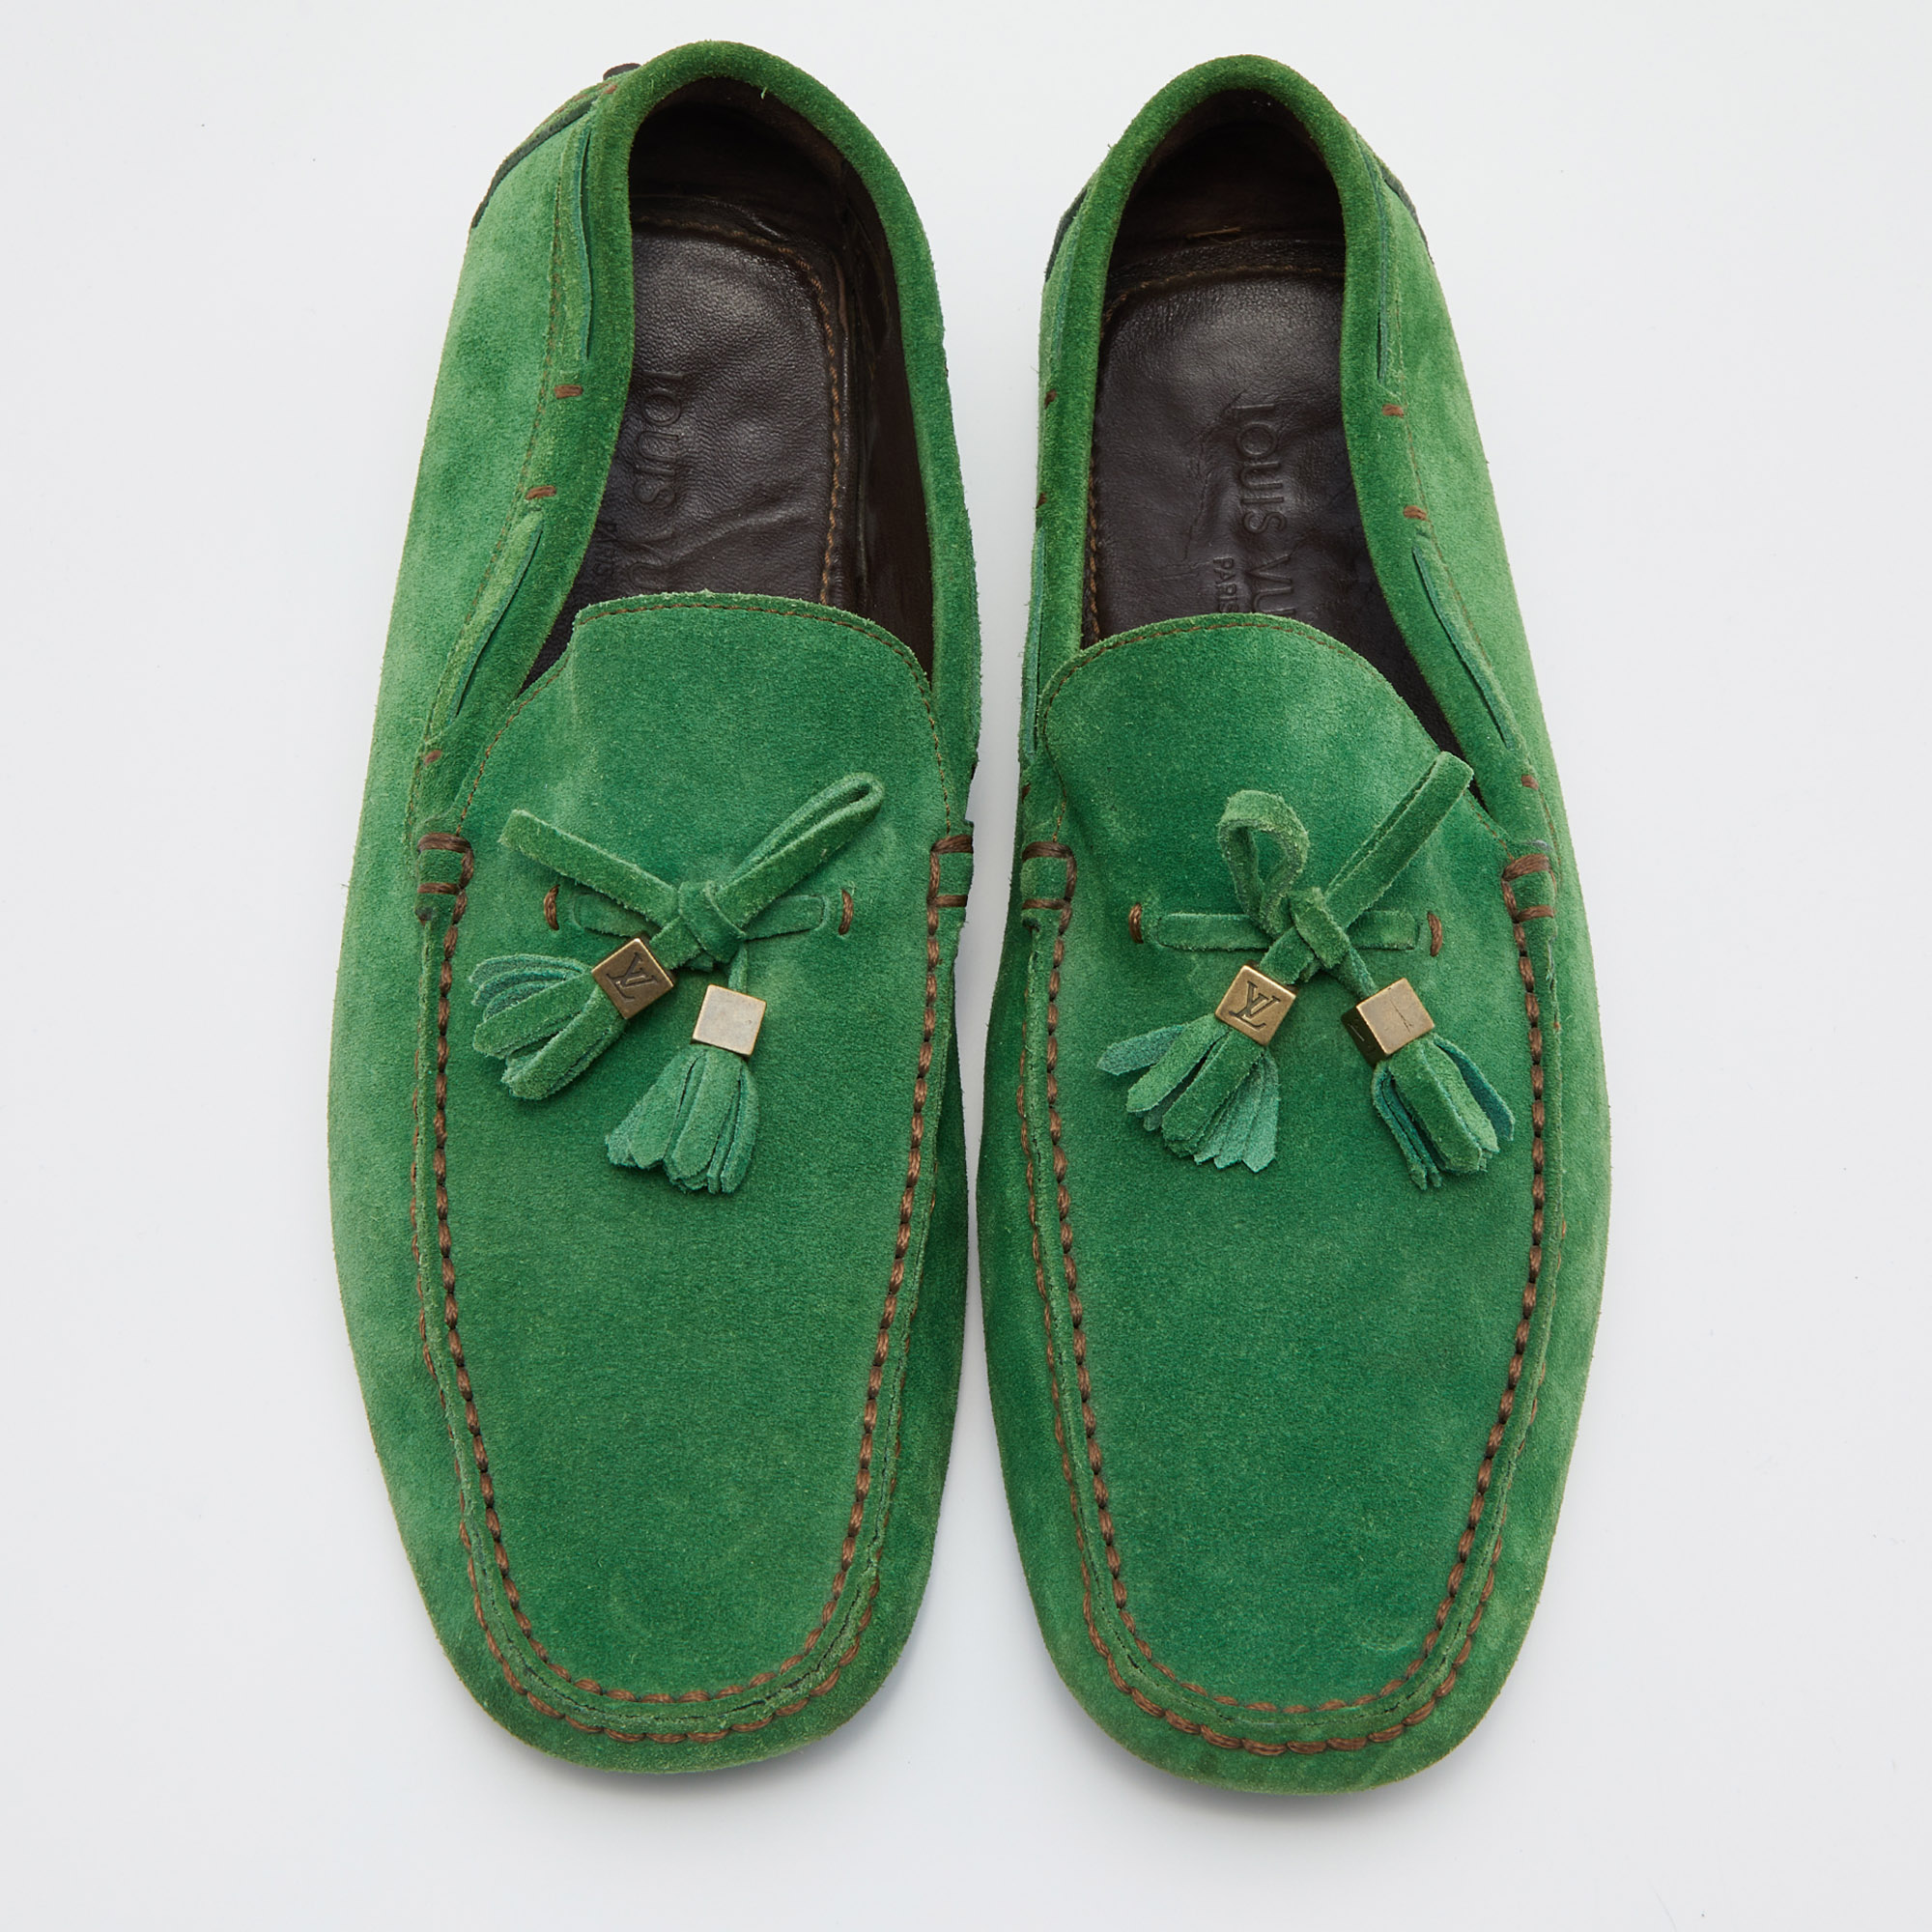 Louis Vuitton Green Suede Imola Tassel Slip On Loafers Size 41.5